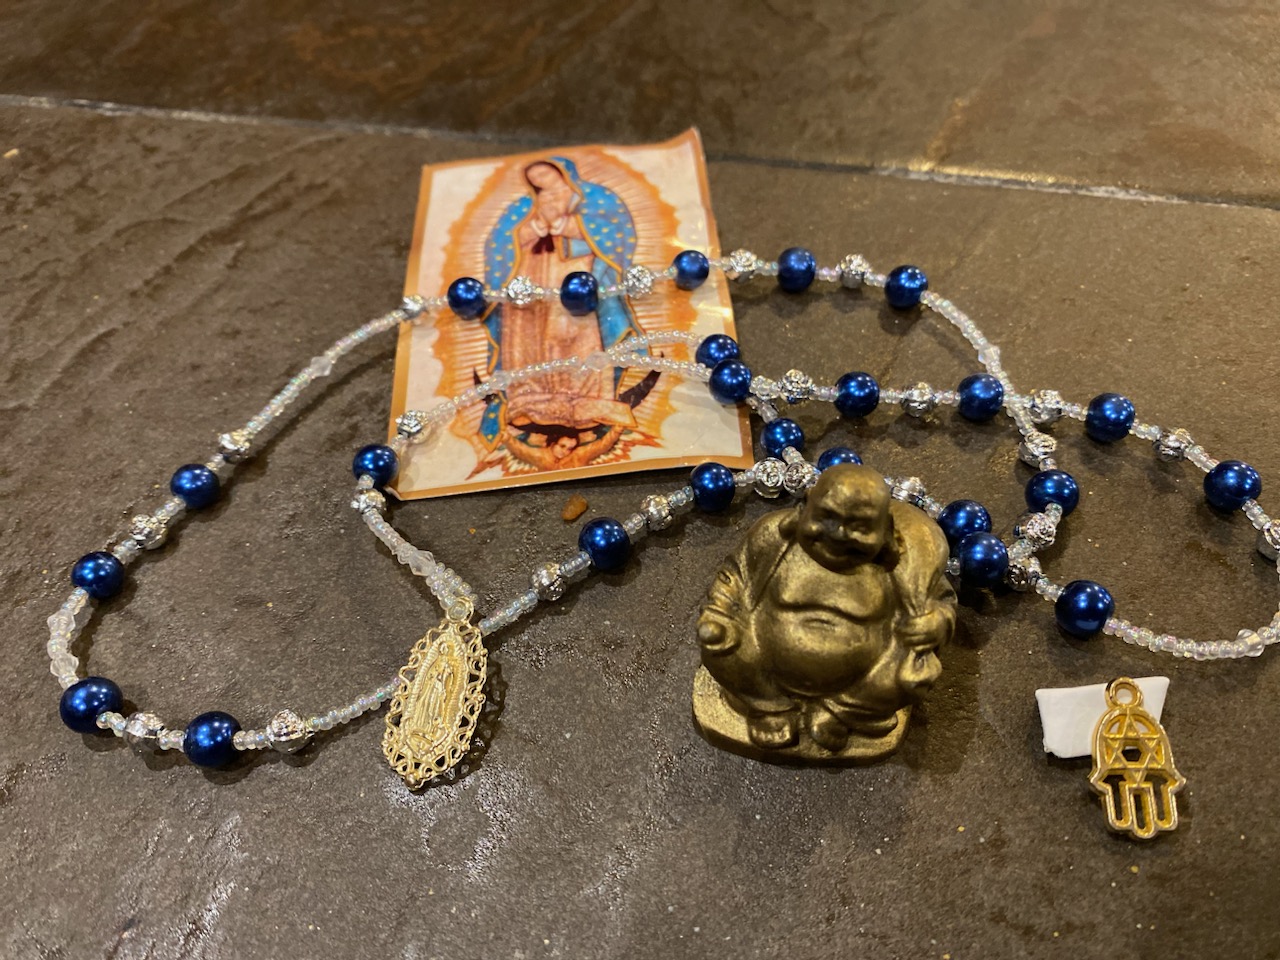 A pile of religious items, including a small Buddha statue and an image of the Virgin Mary.